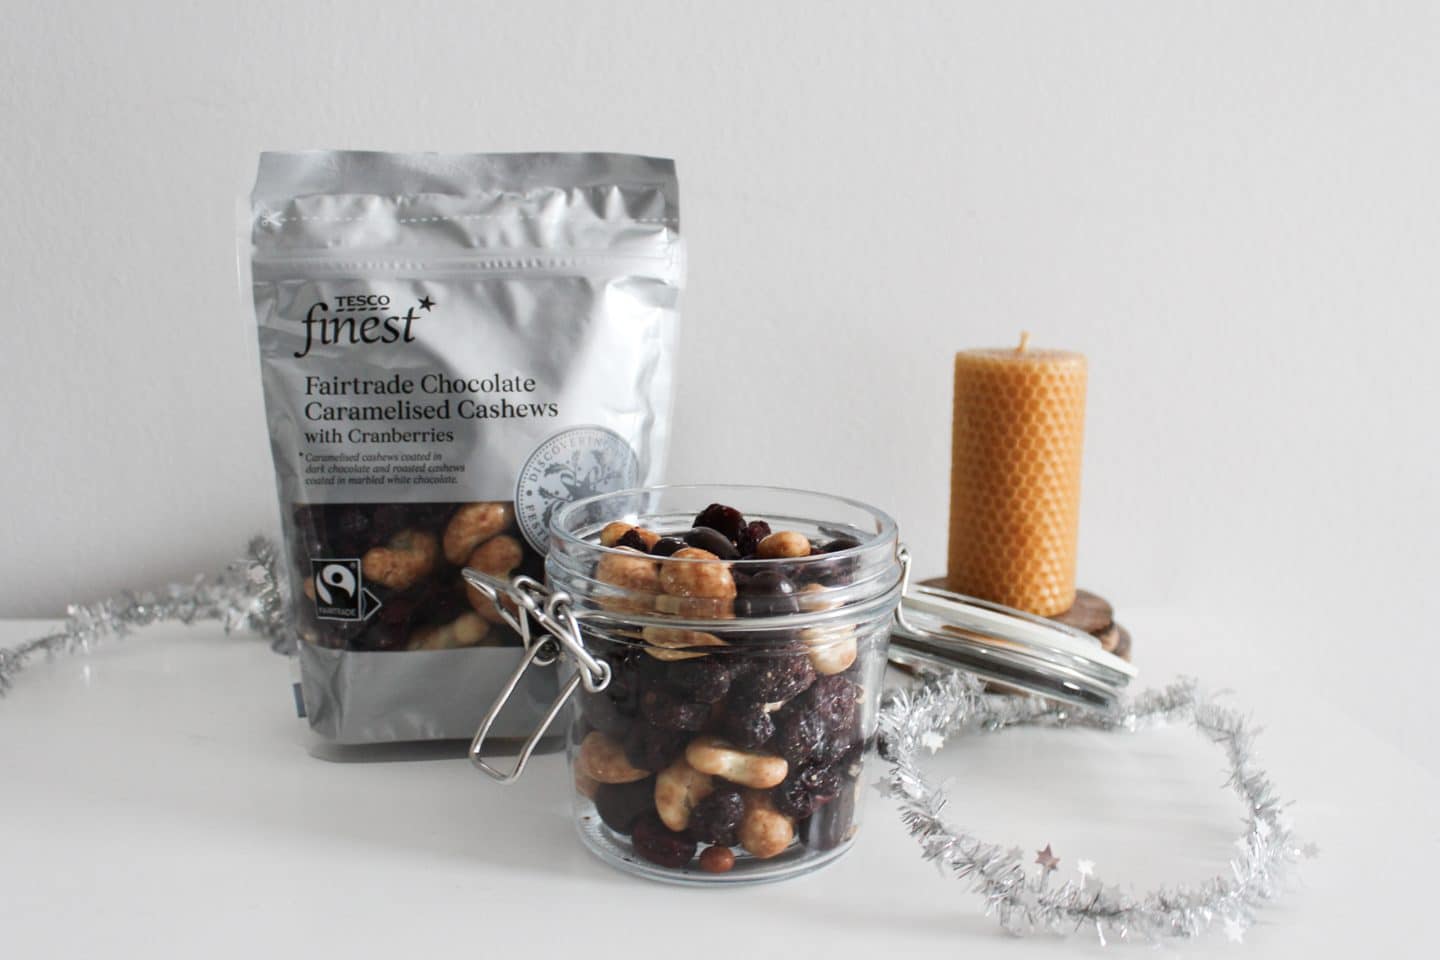 Fairtrade Chocolate Caramelised Cashews with Cranberries